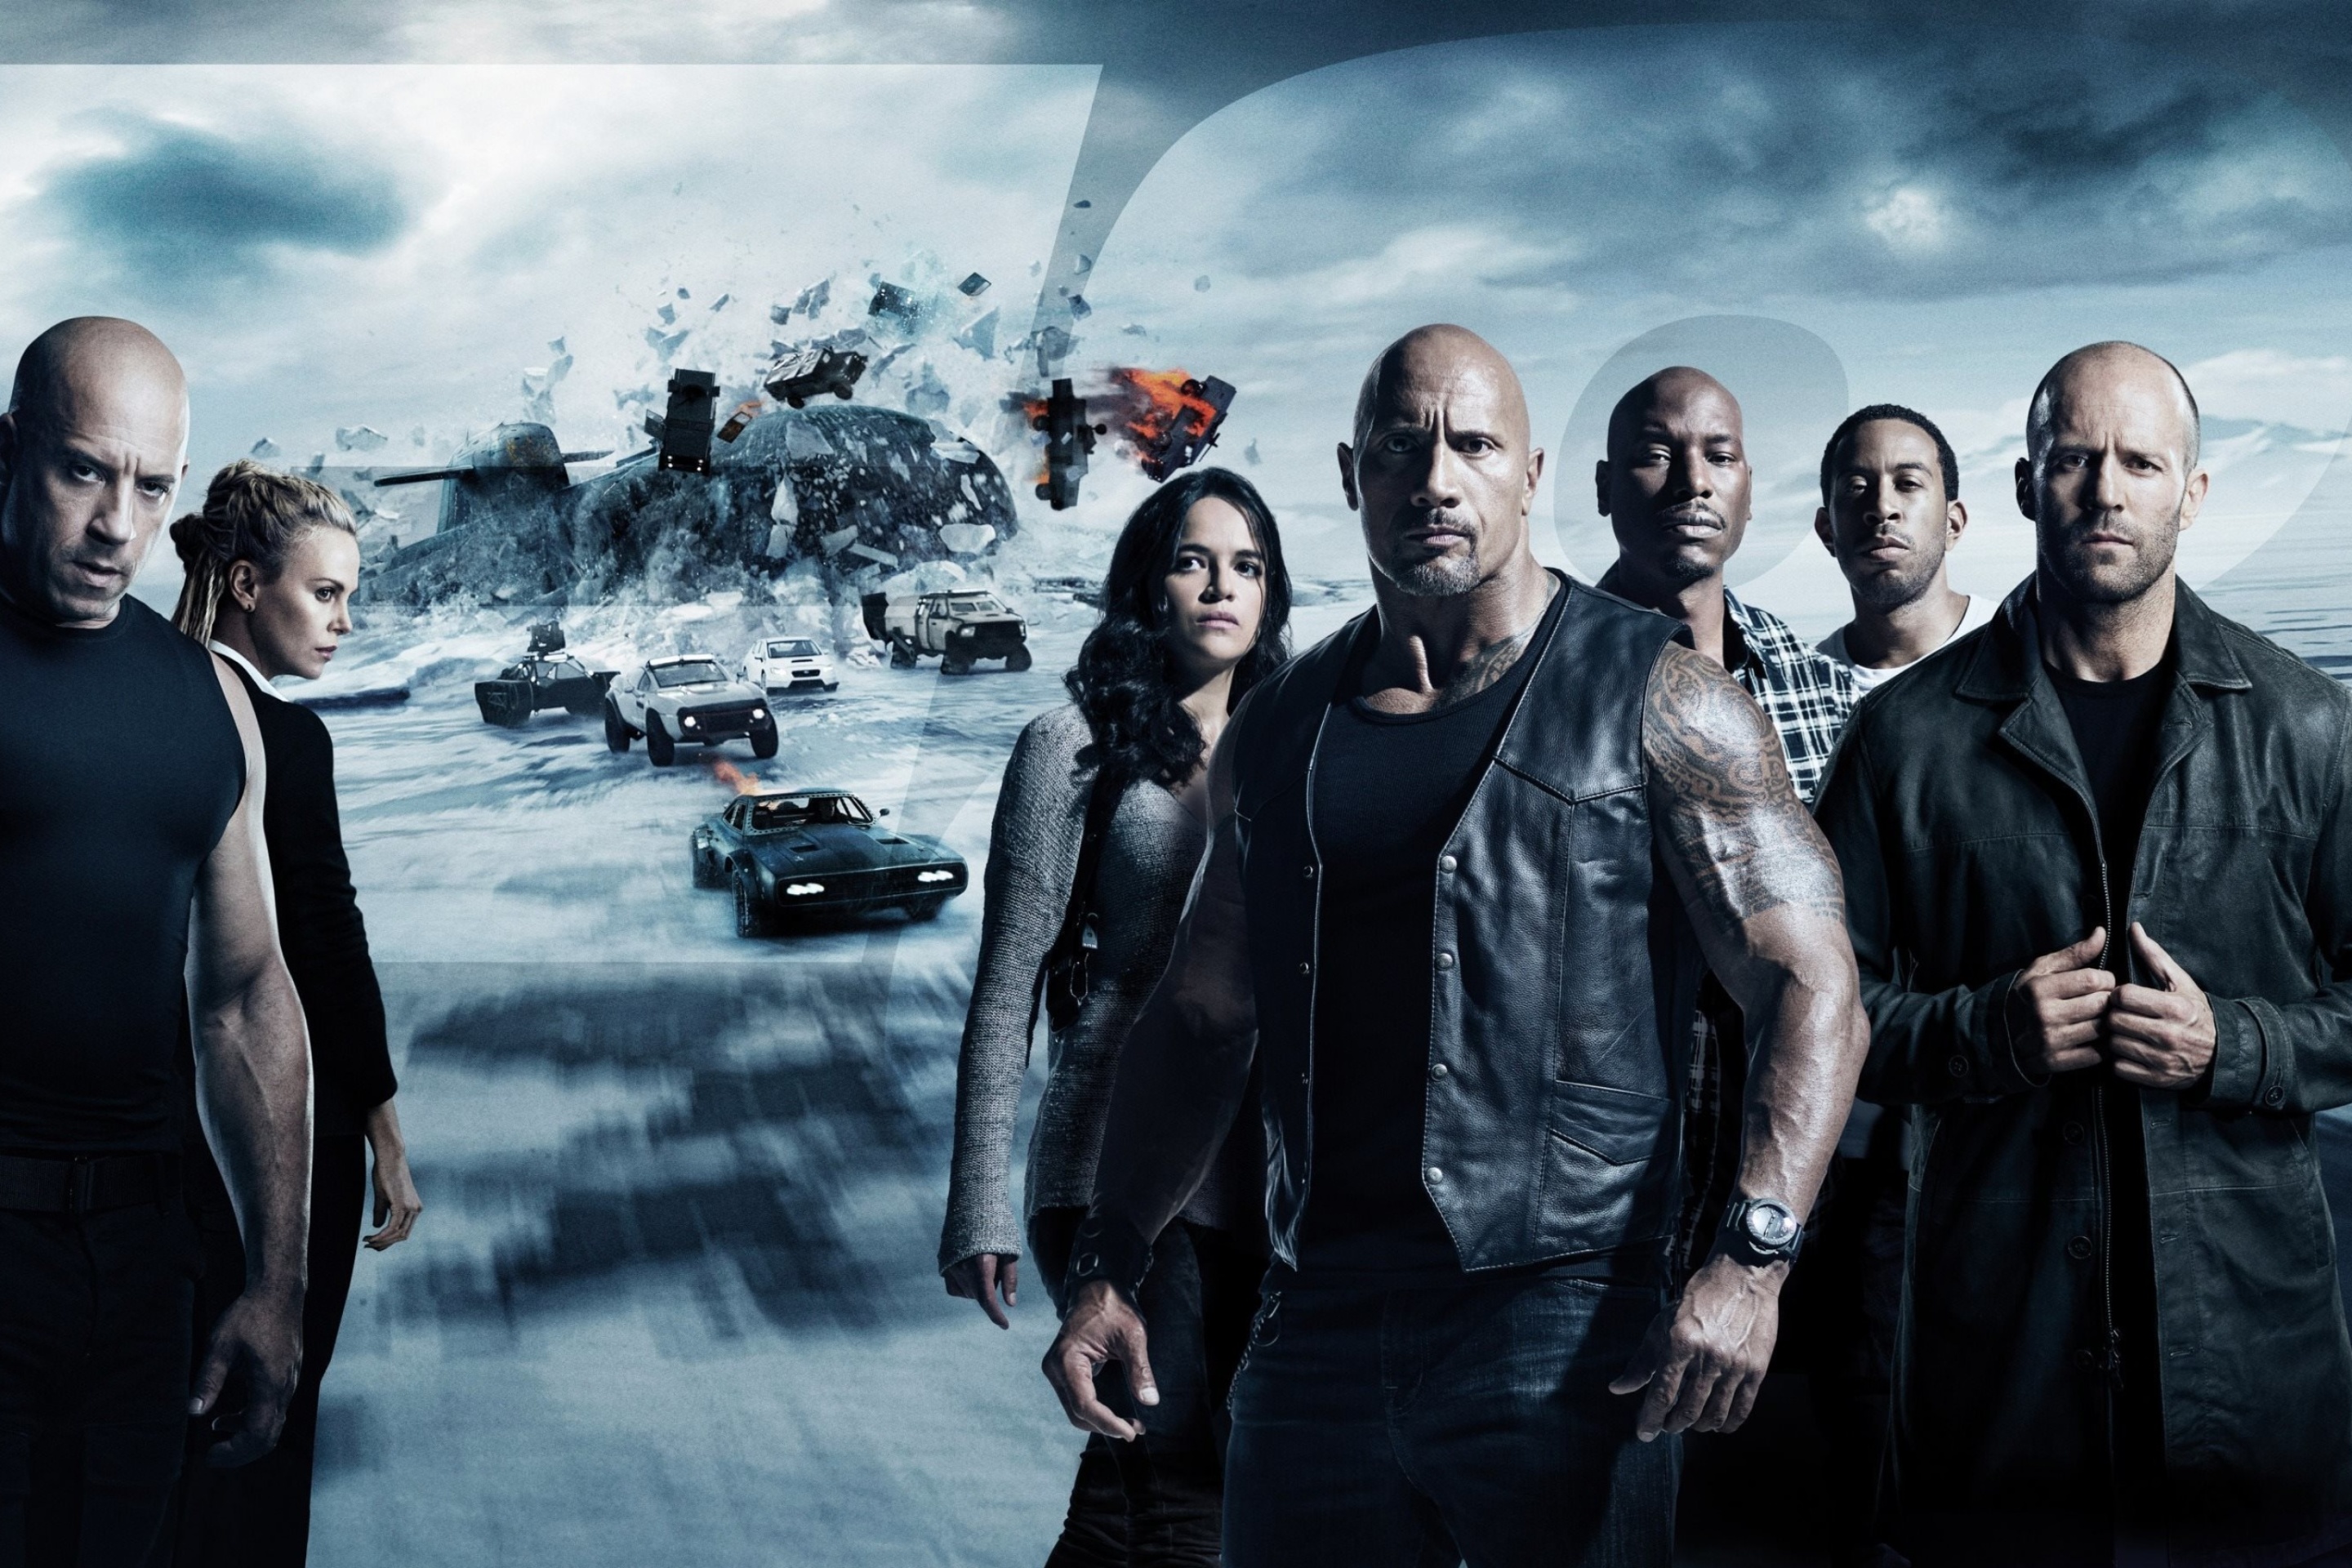 The Fate of the Furious with Vin Diesel, Dwayne Johnson, Charlize Theron screenshot #1 2880x1920